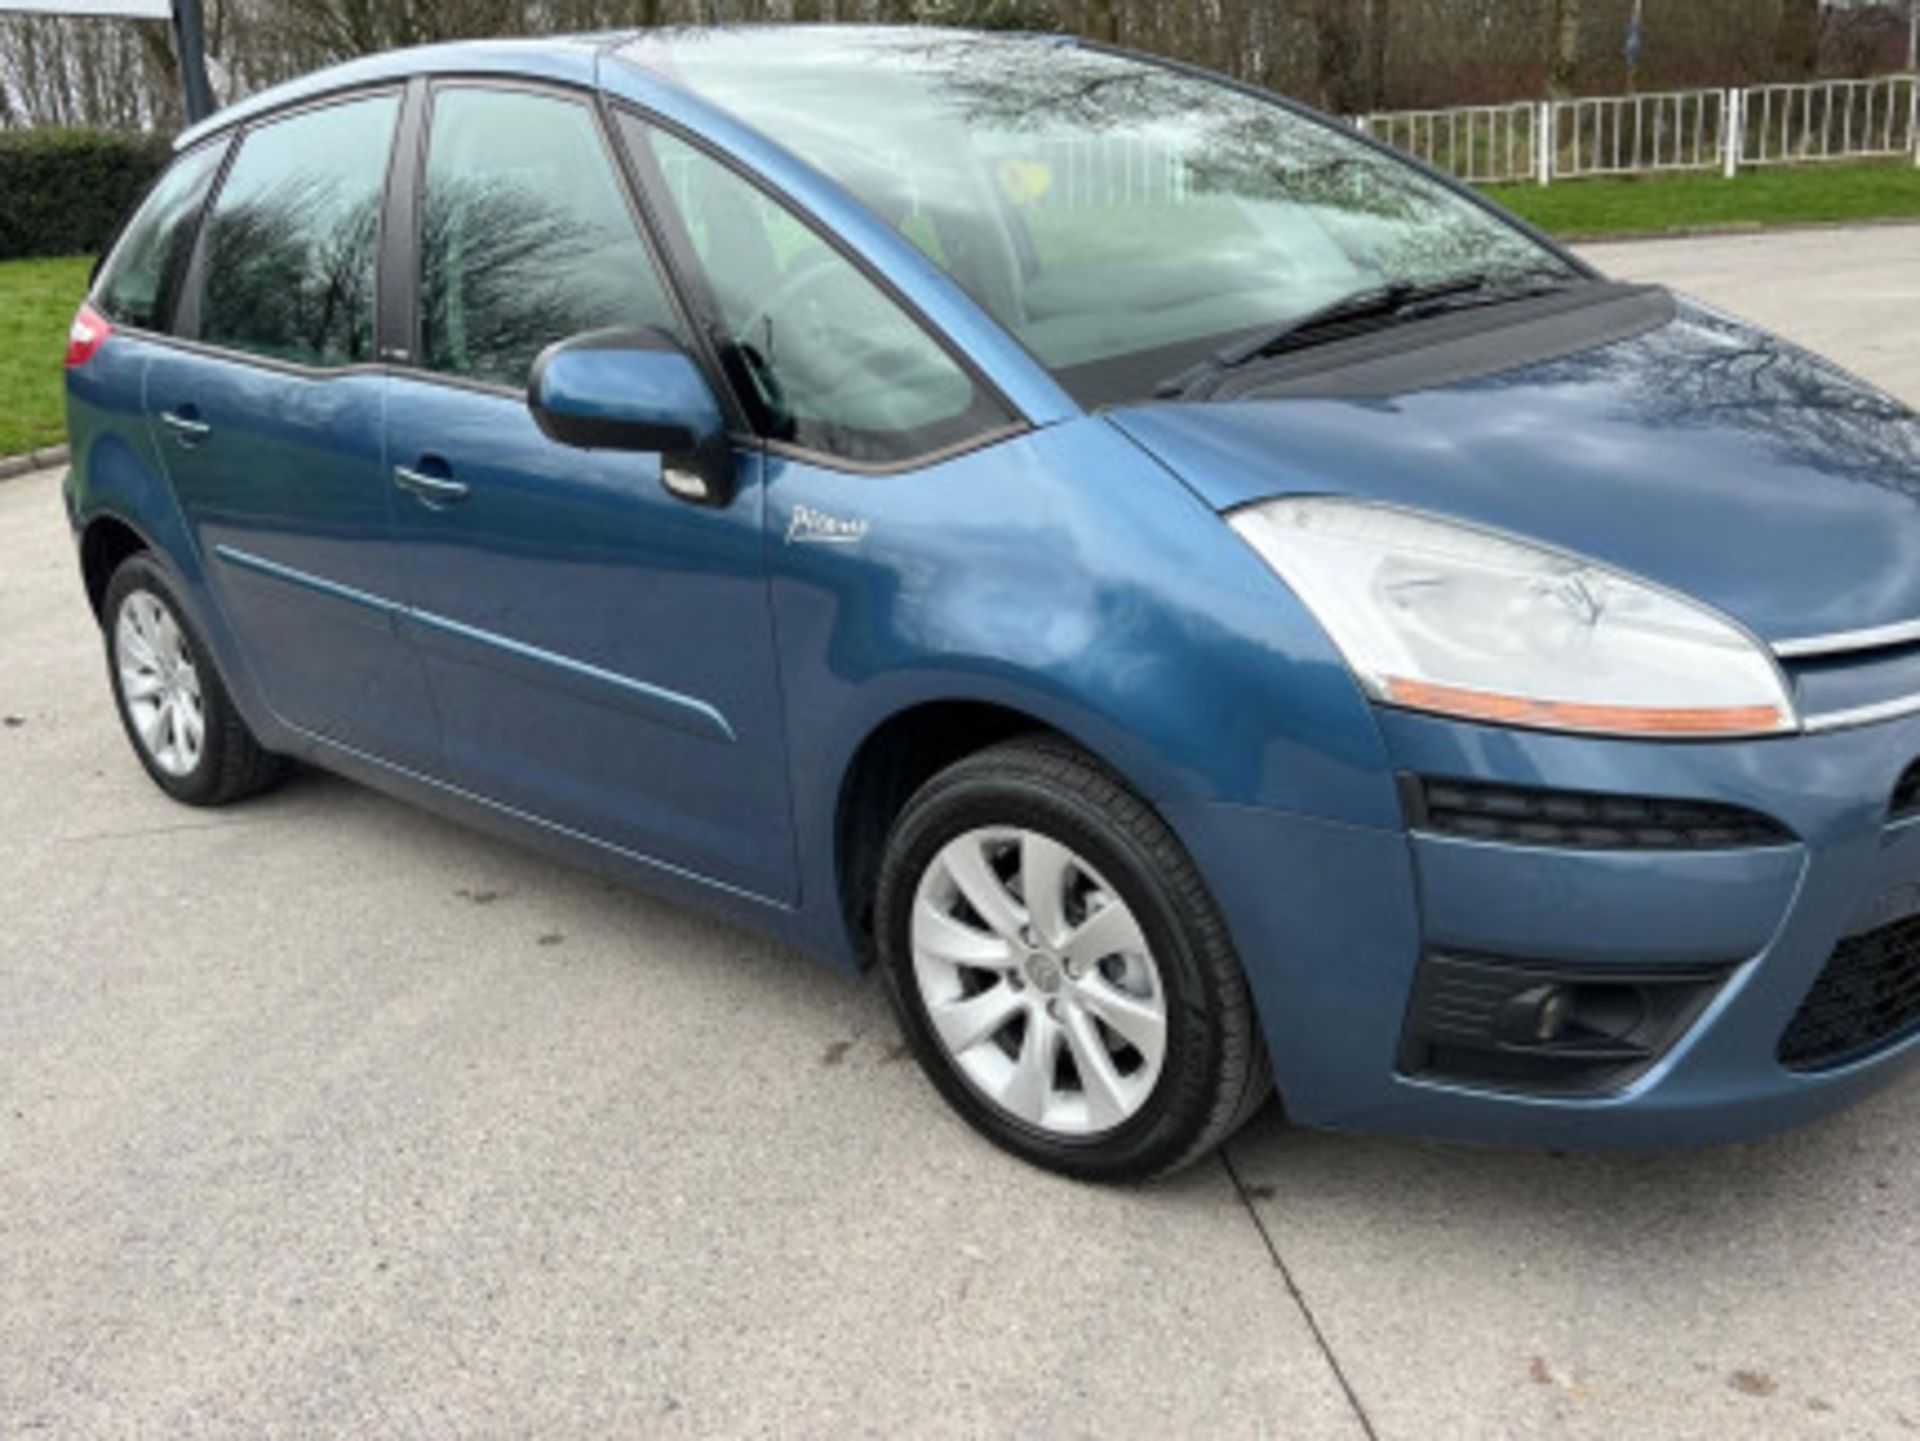 2009 CITROEN C4 PICASSO 1.6 HDI VTR+ EGS6 5DR >>--NO VAT ON HAMMER--<< - Image 48 of 123